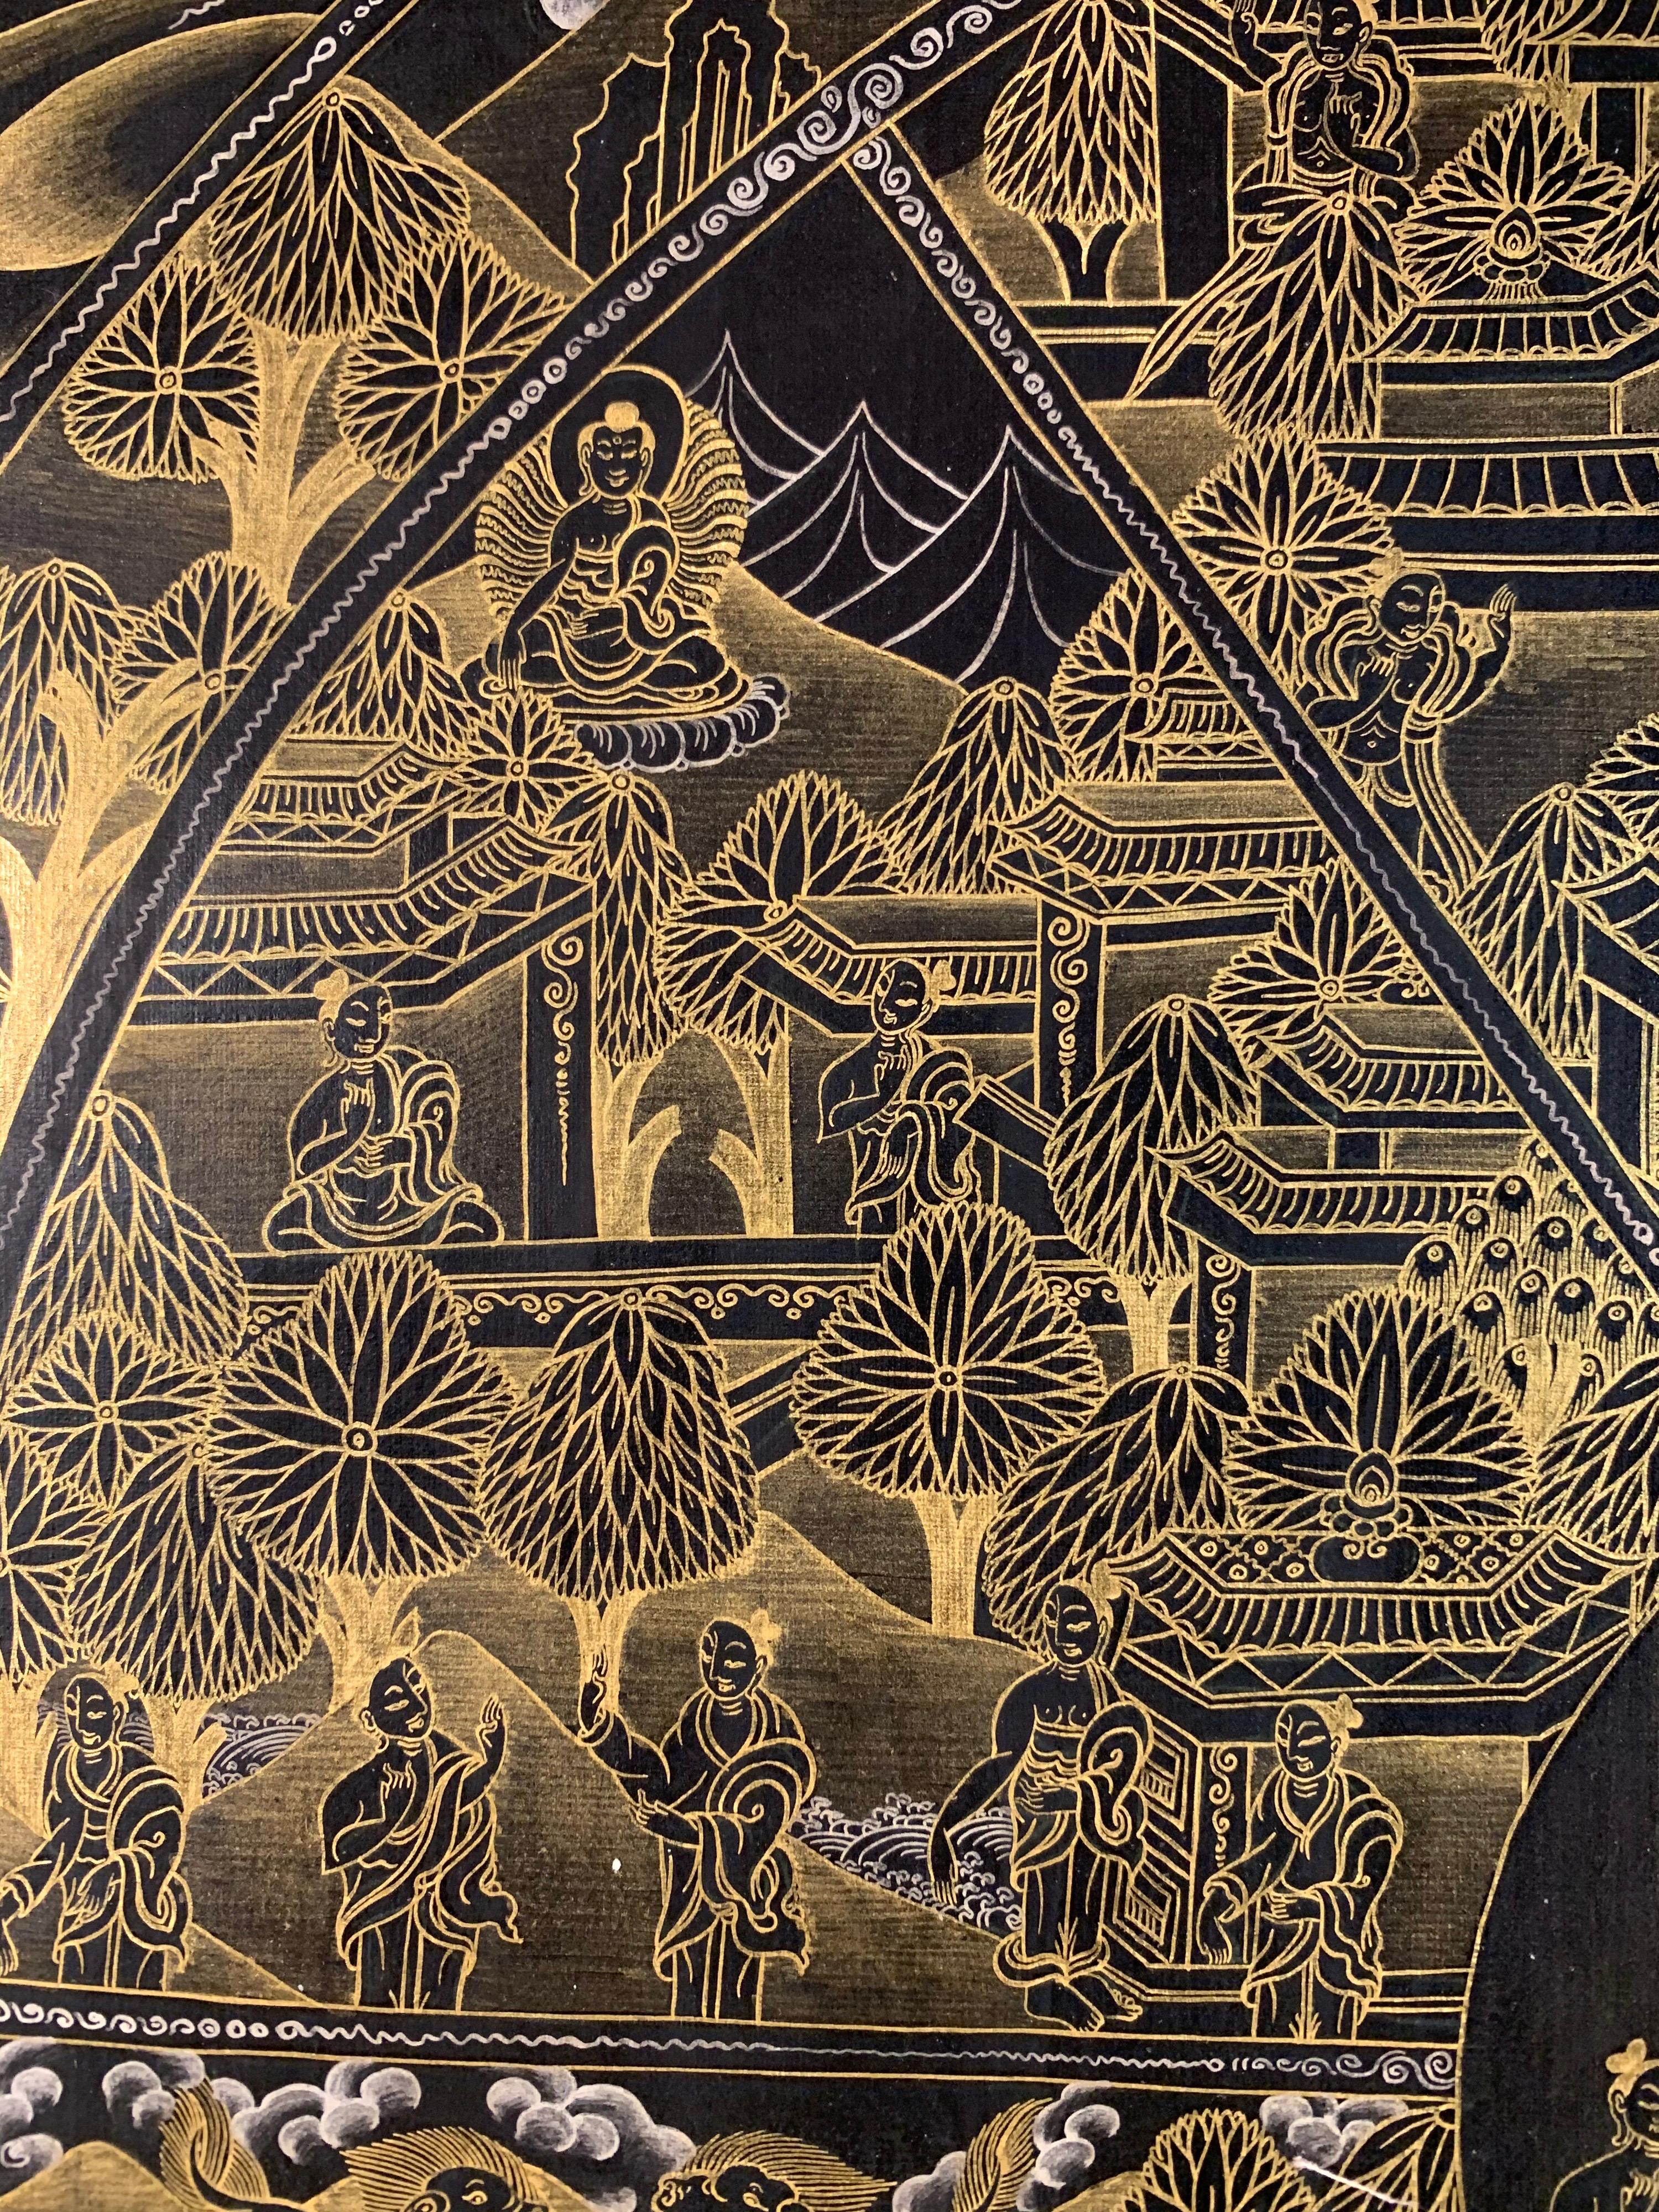 This wheel of life thangka is hand painted on canvas with 24k gold. The contrast of yellow gold on black makes it a stunning art. The artist has painstakingly painted every detail work to make it a desirable piece of art.
The 